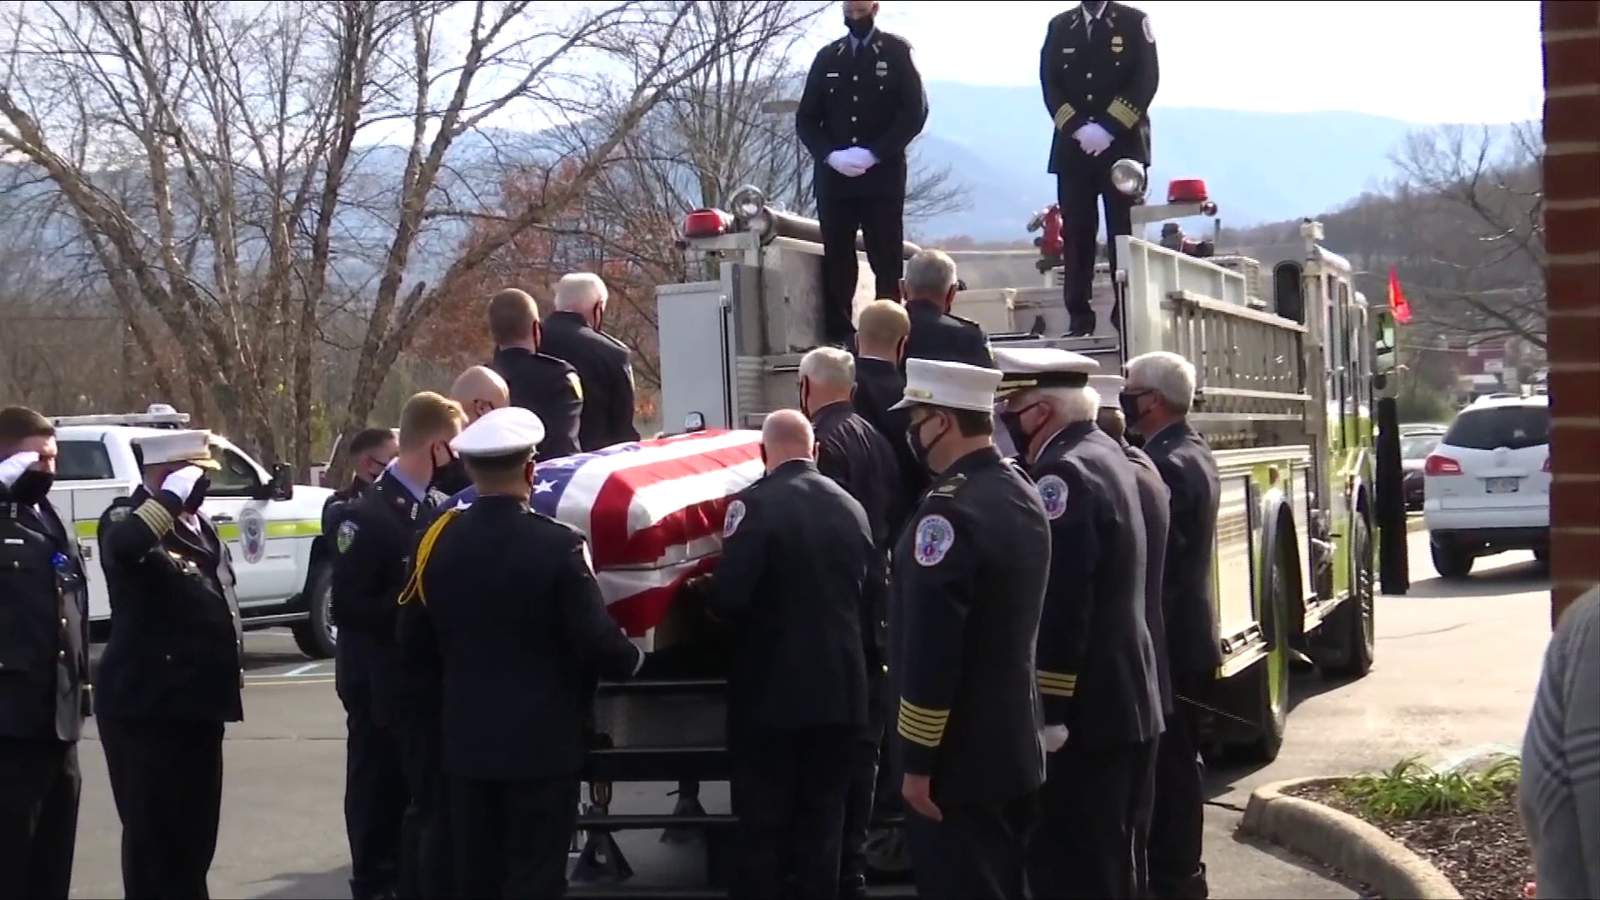 Roanoke County firefighter laid to rest after nearly 40 years of service